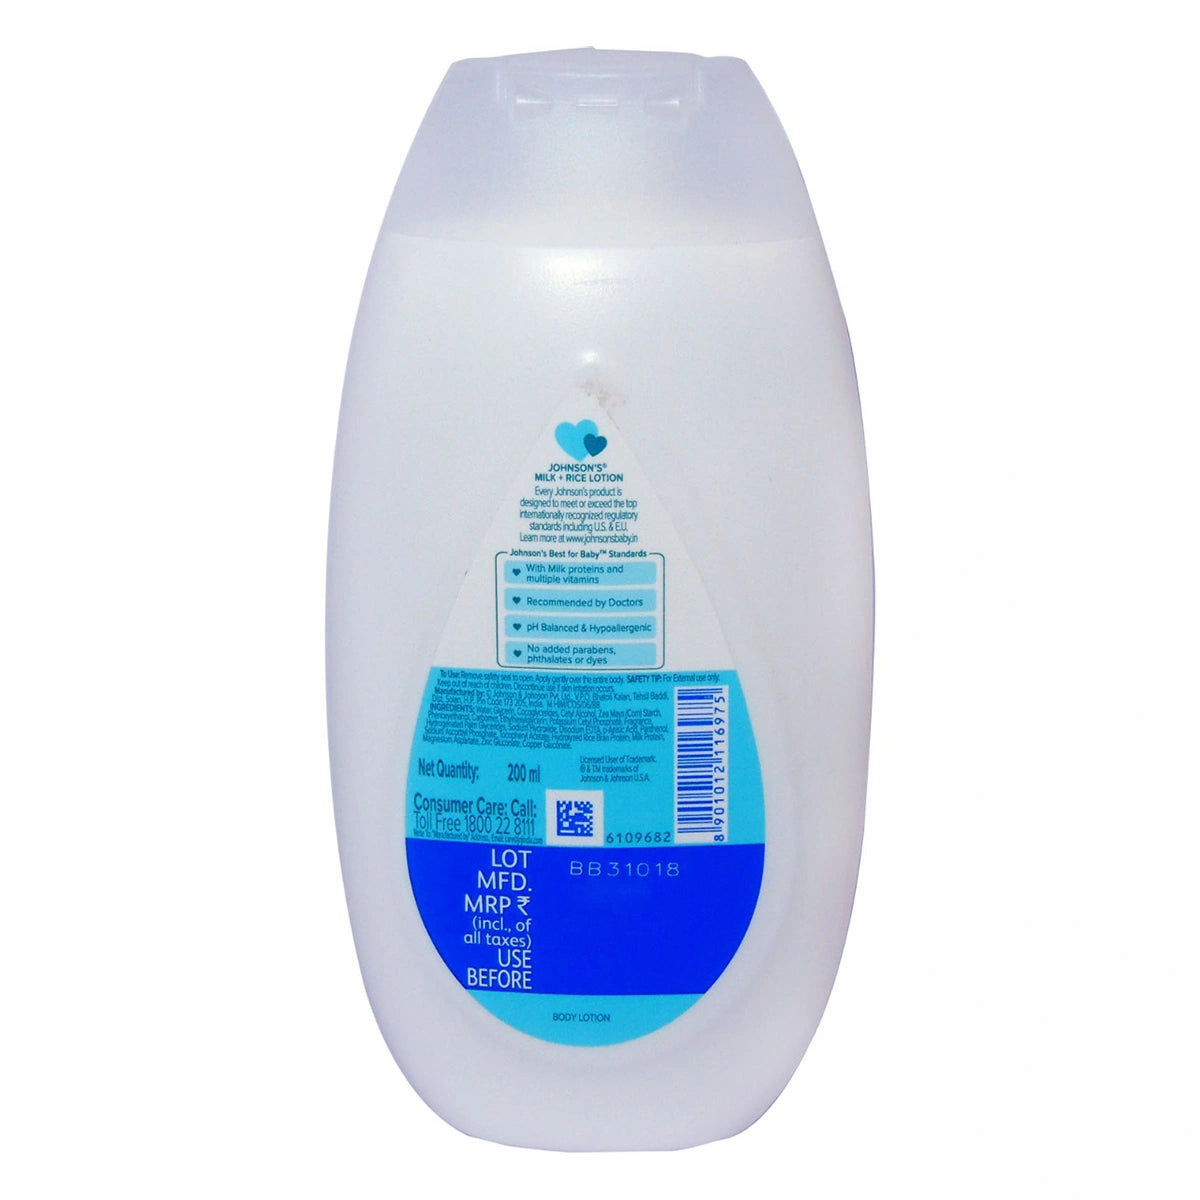 JOHNSONS MILK and RICE BABY LOTION 200ml